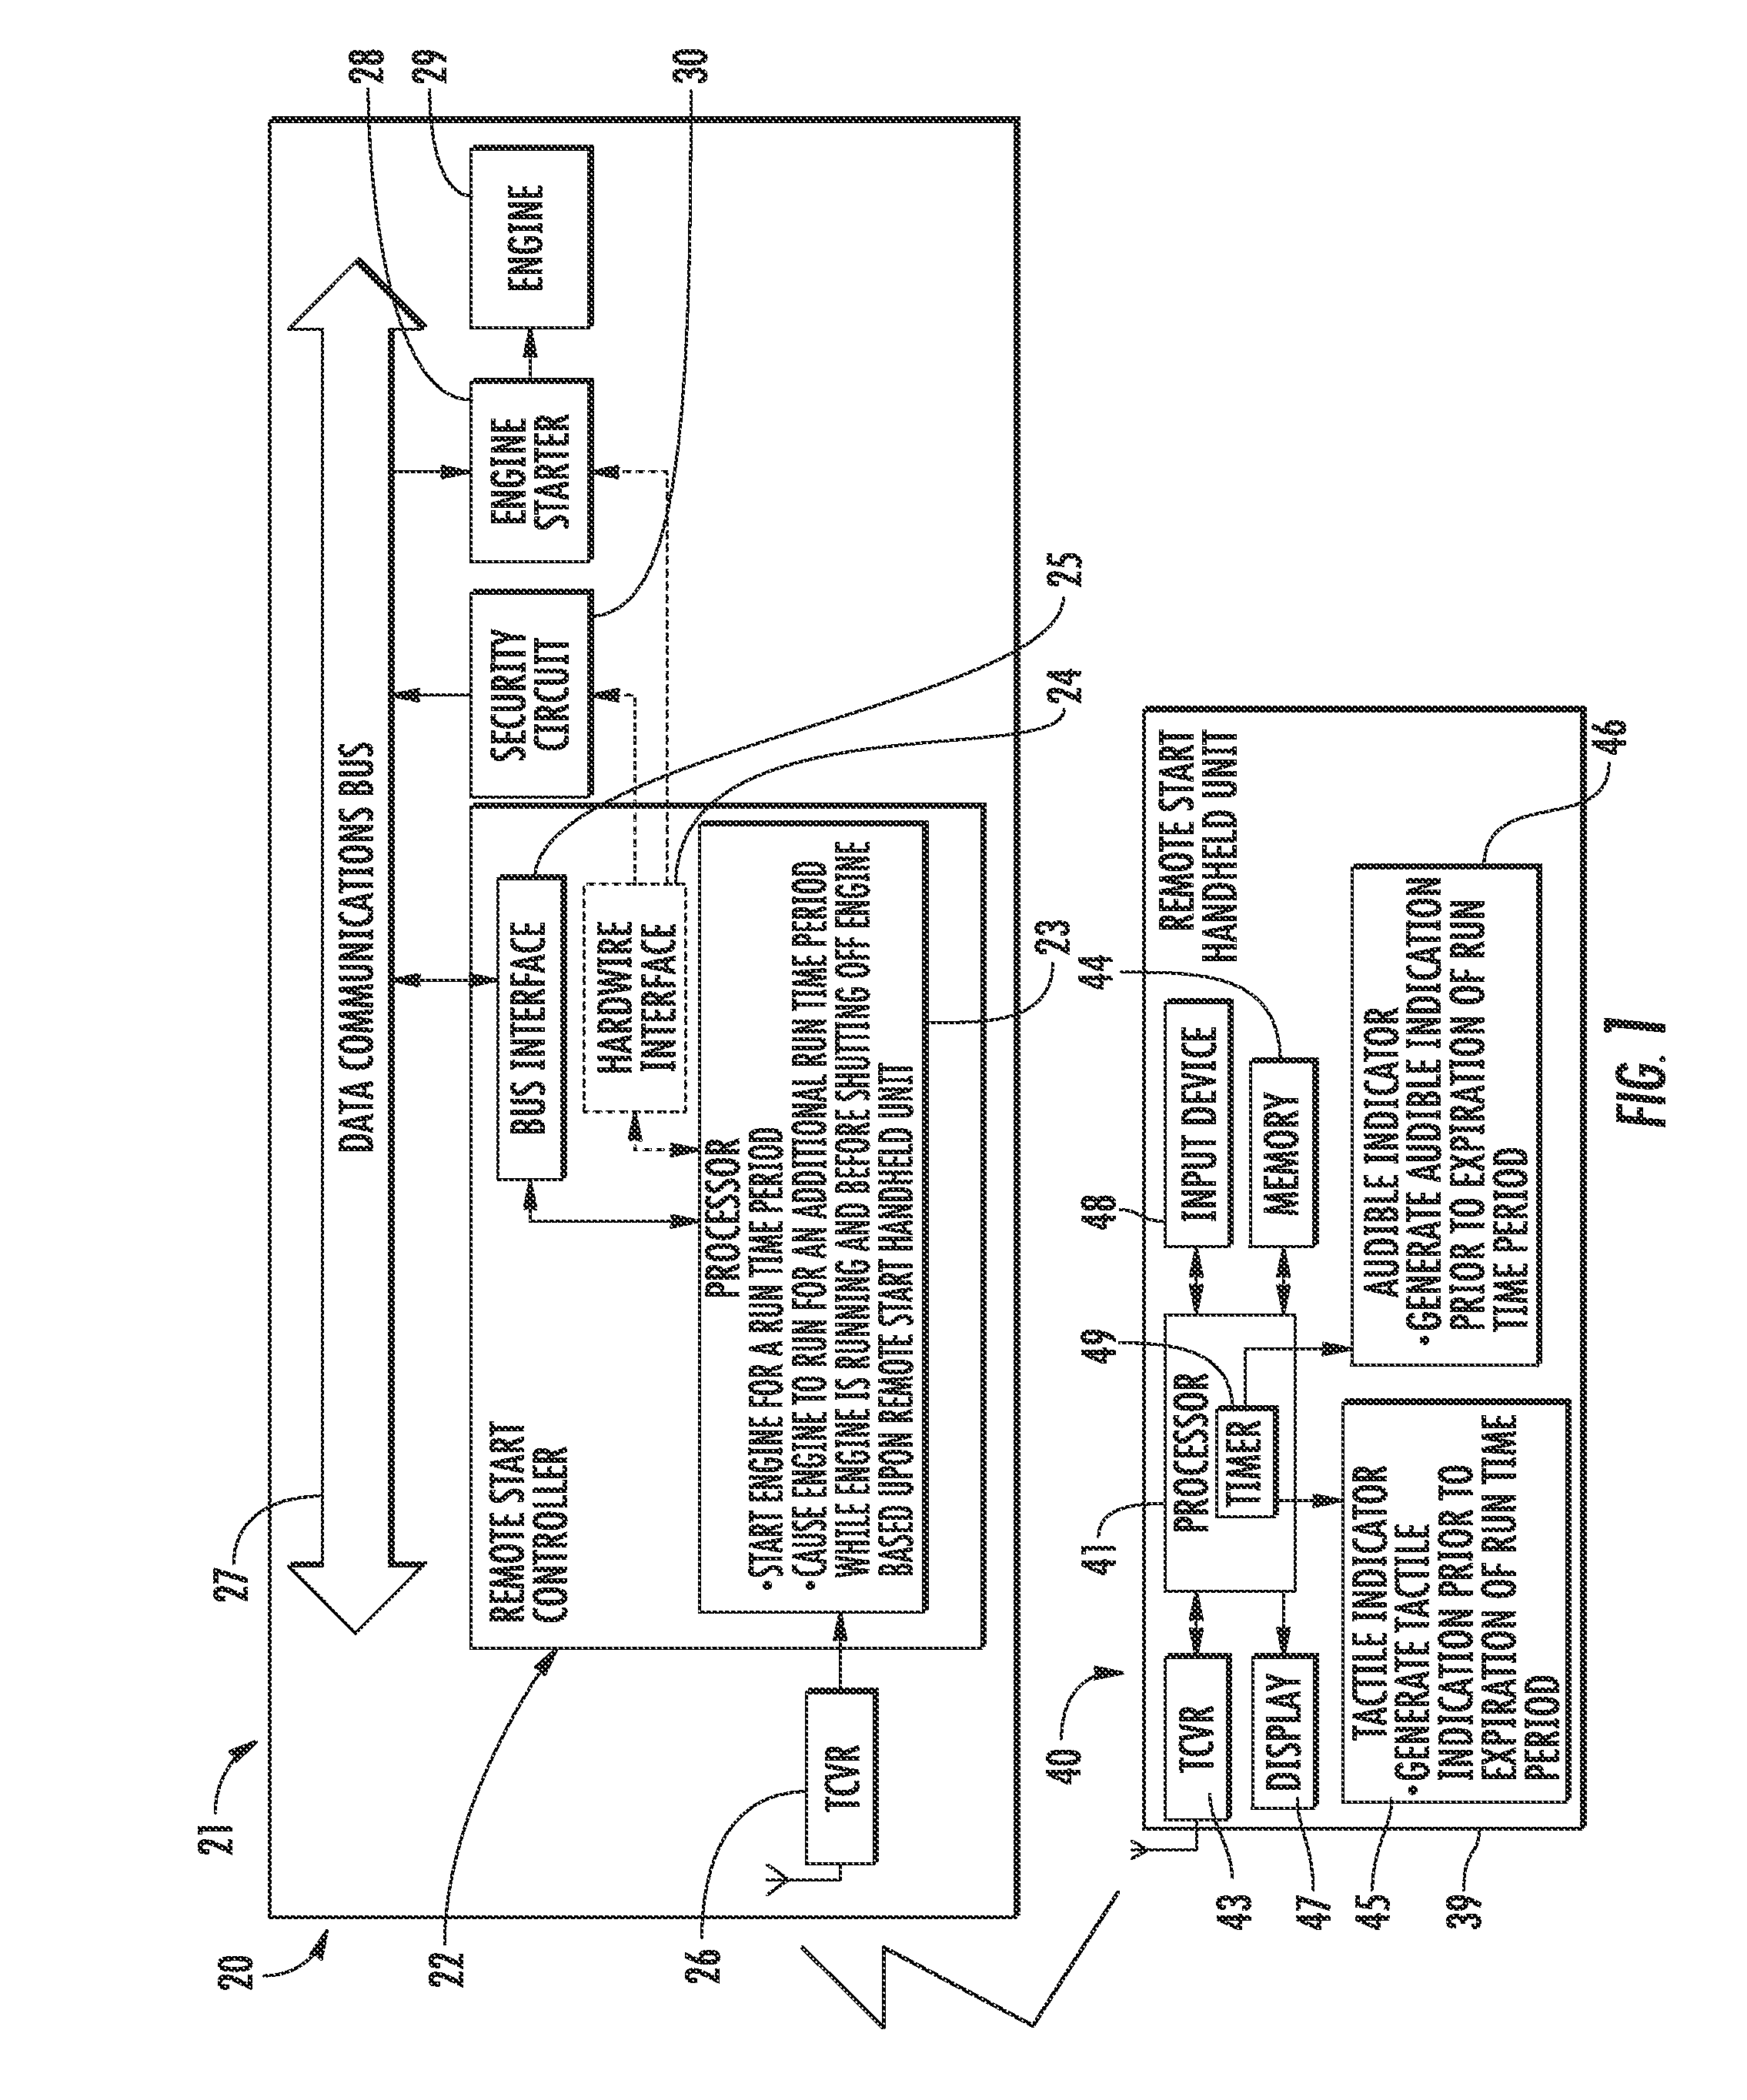 Remote vehicle starting system providing an audible indication relating to remote starting and associated methods